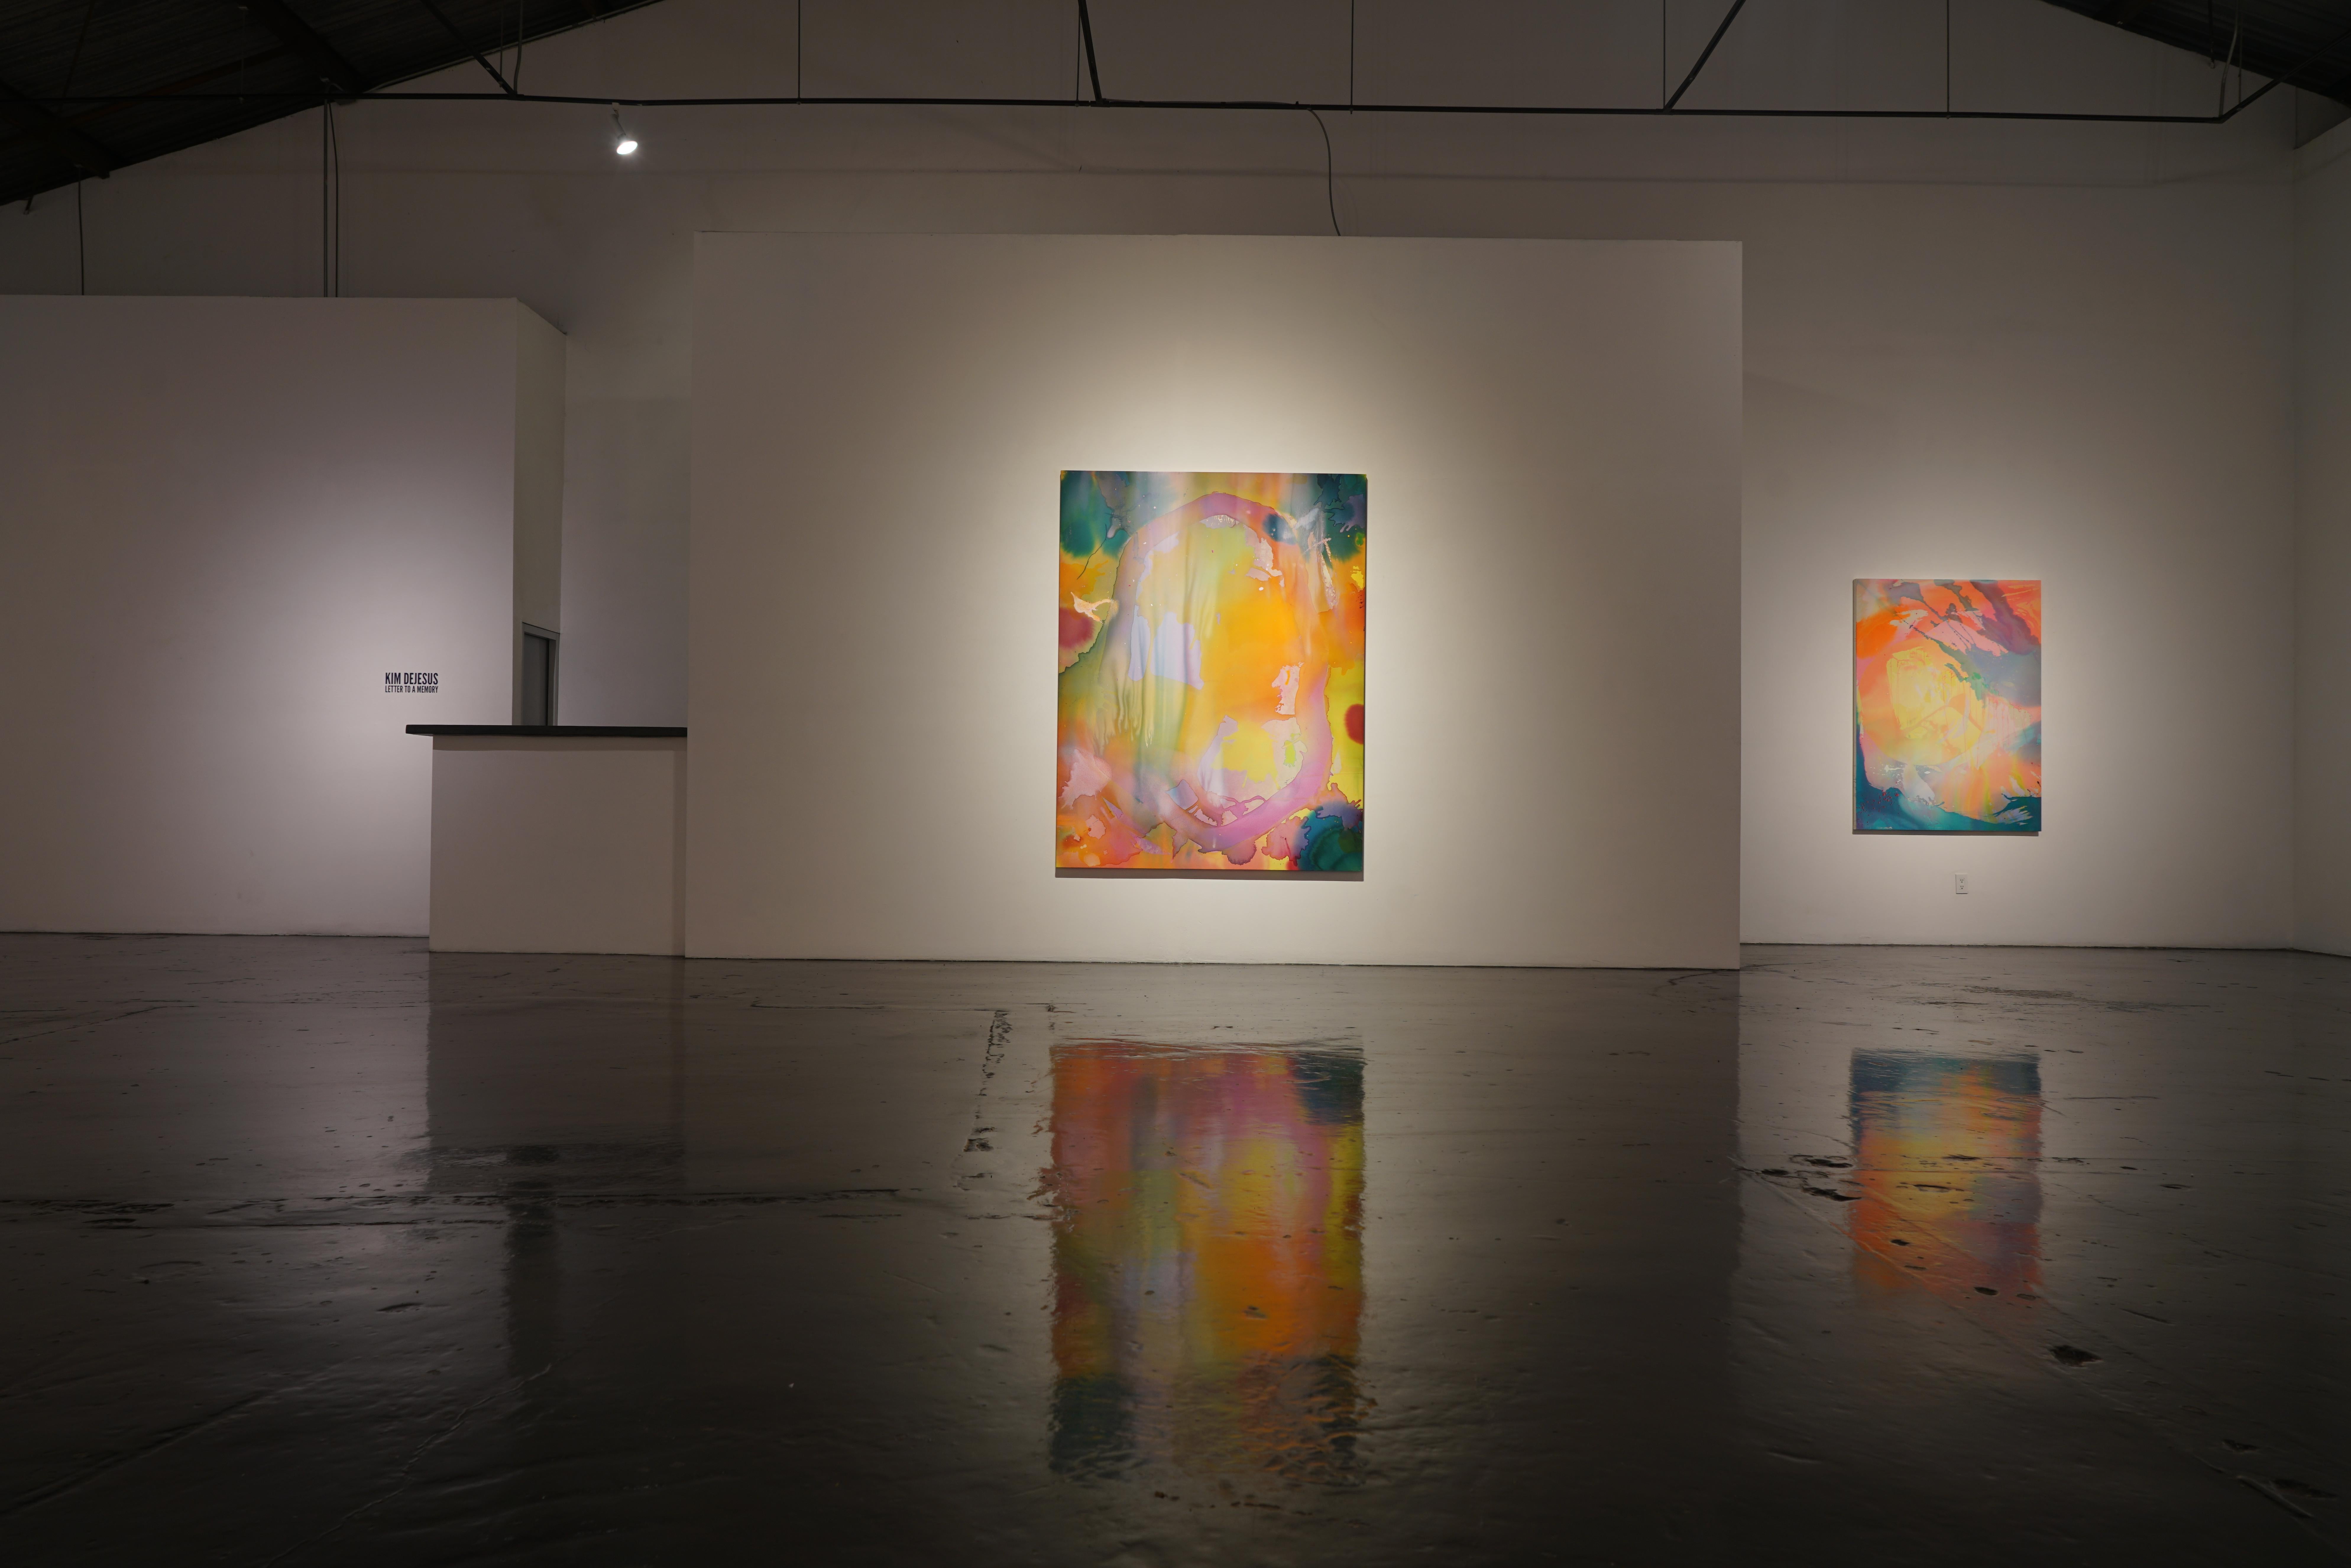 William Turner Gallery is pleased to present our debut solo exhibition for Kim DeJesus, entitled Letter to a Memory. This new series of colorful abstract paintings continues the artist’s exploration of memory - delving into those aspects of life